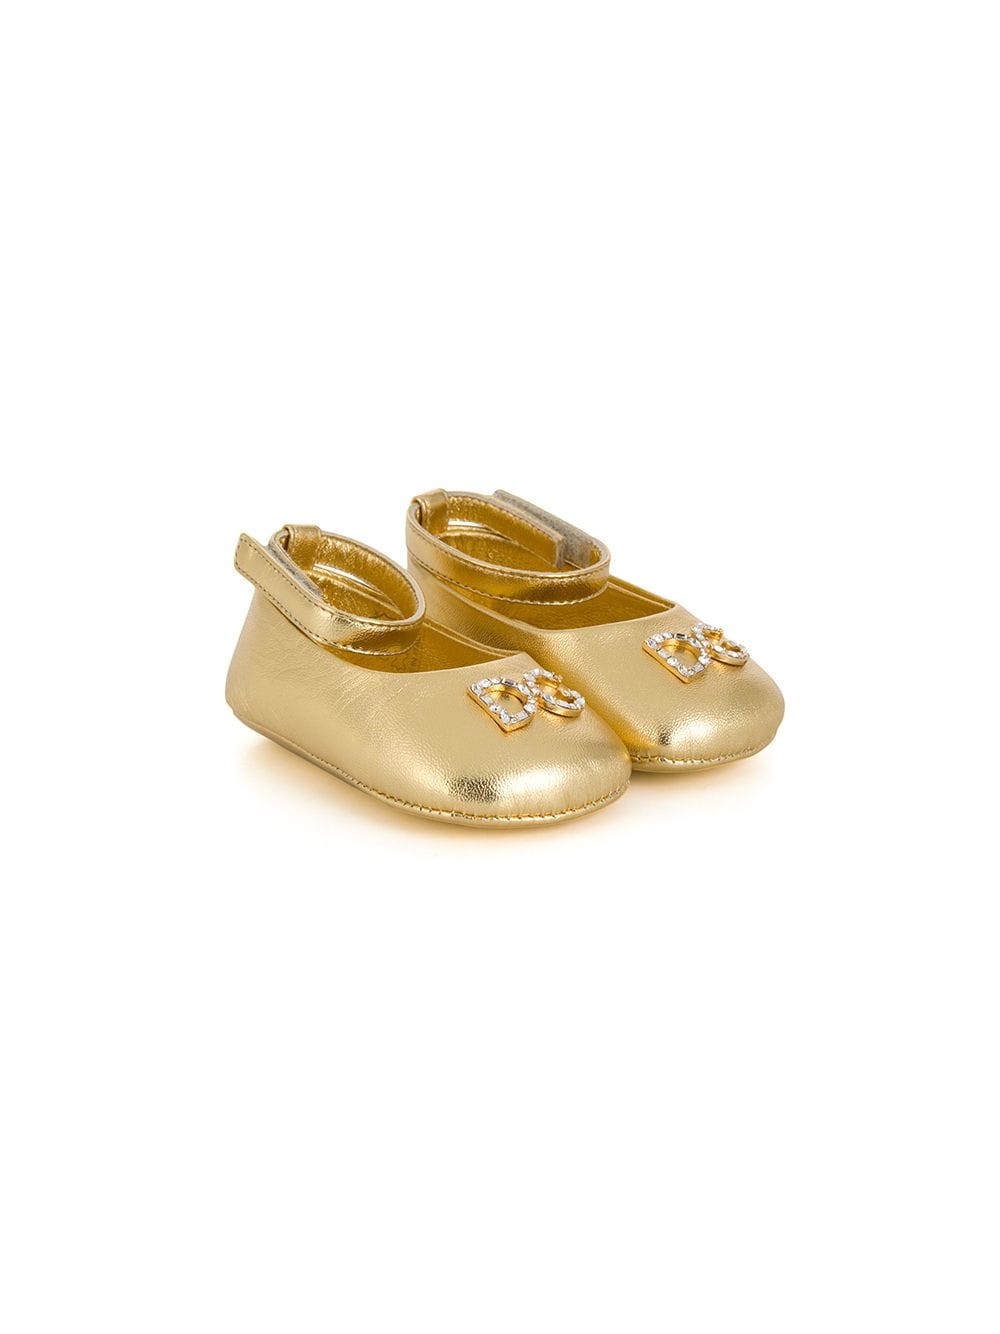 Image 1 of Dolce & Gabbana Kids foiled leather ballerina shoes